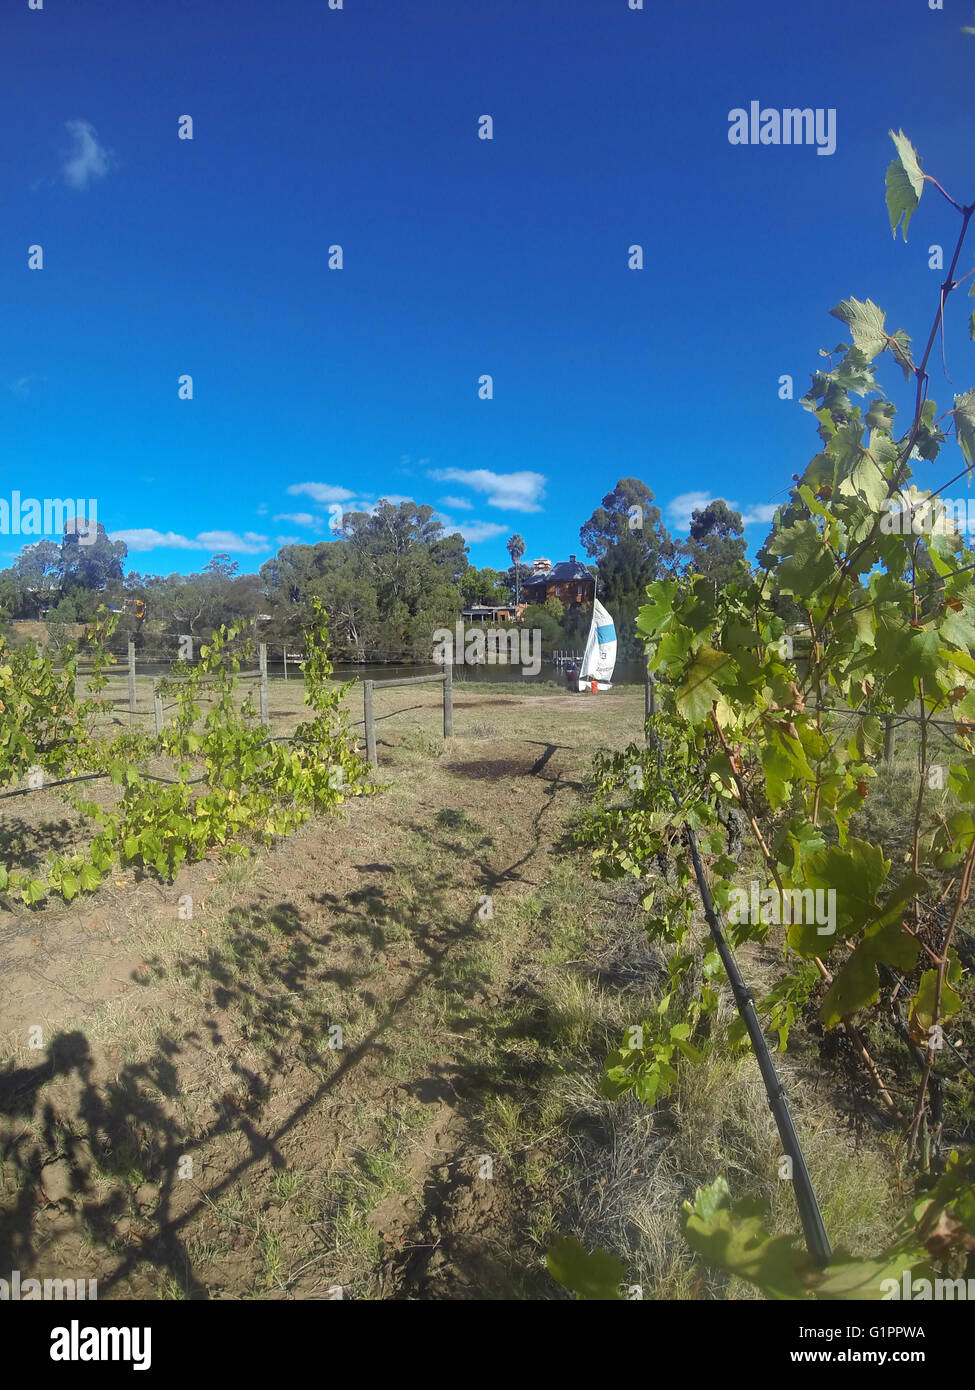 Sailing dinghy amongst autumn grape vines, RiverBank Winery, Swan Valley, Swan River, Perth, Western Australia. No MR or PR Stock Photo